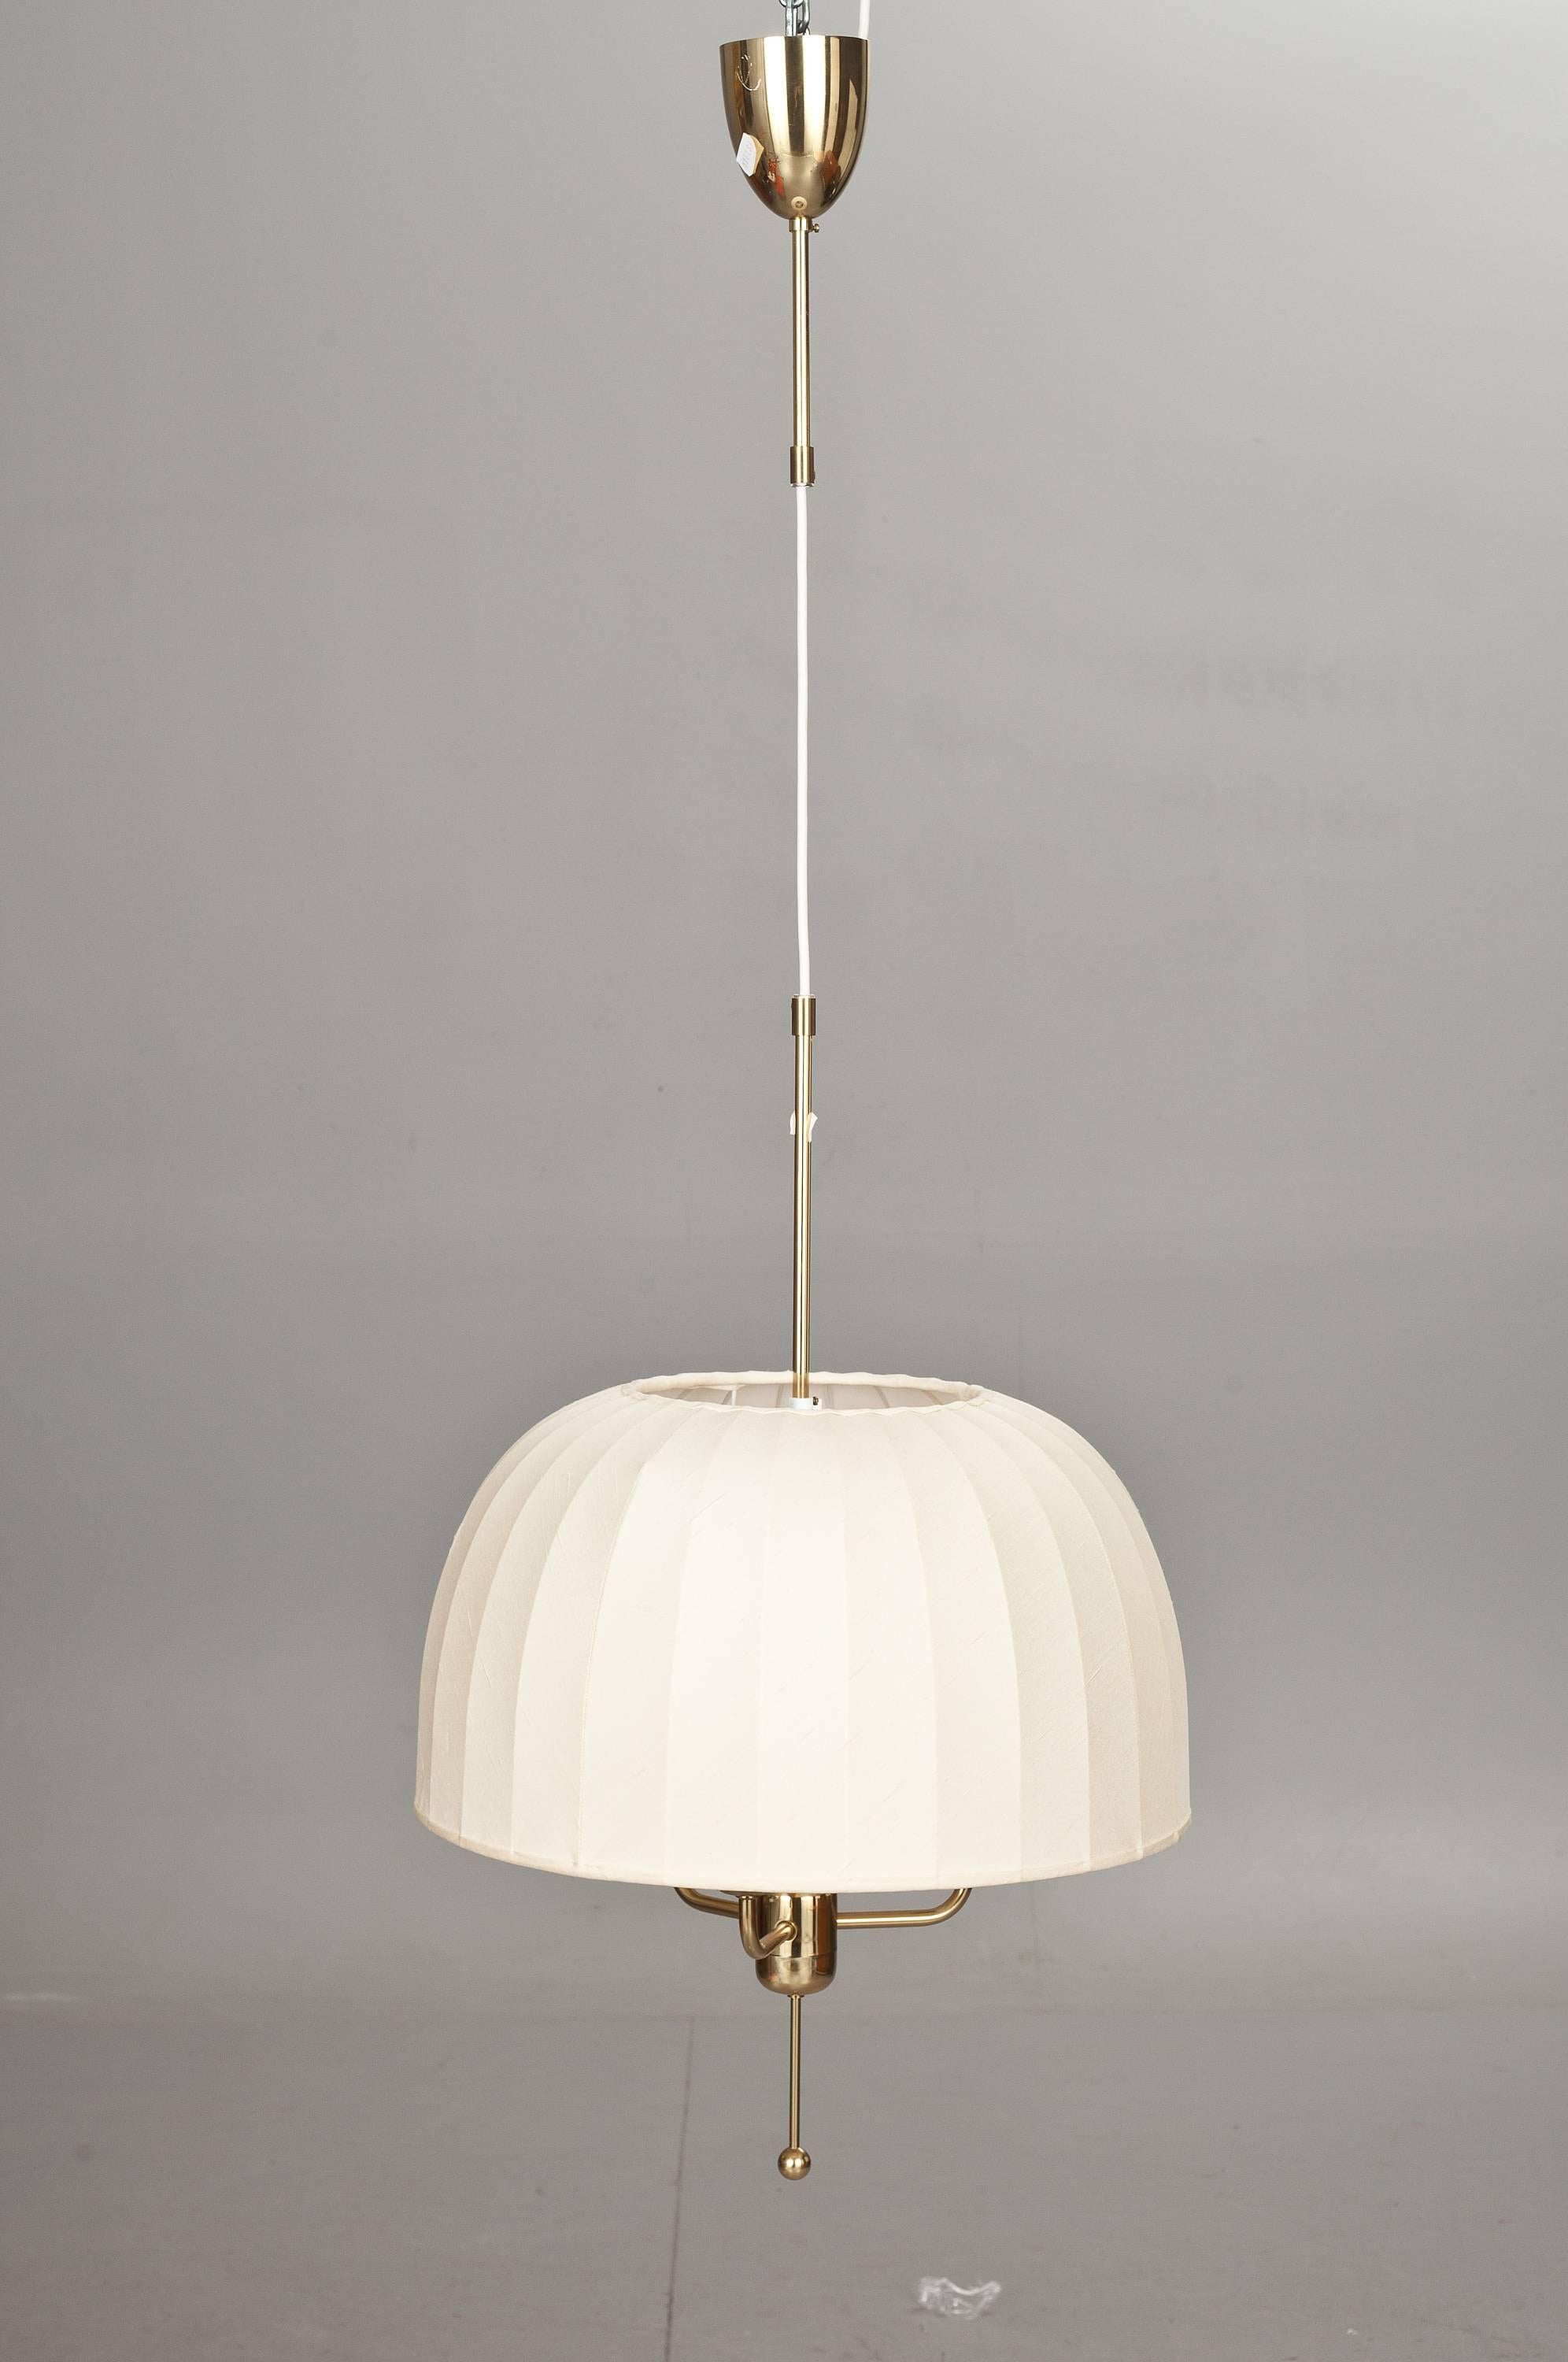 A pendant designed by Hans-Agne Jakobsson, Sweden, circa 1970.
Silk shade with brass hardware. Marked by manufacturer.
Existing electrical wires, we do not guaranty functionality, rewiring available upon request. The shade diameter 17.75